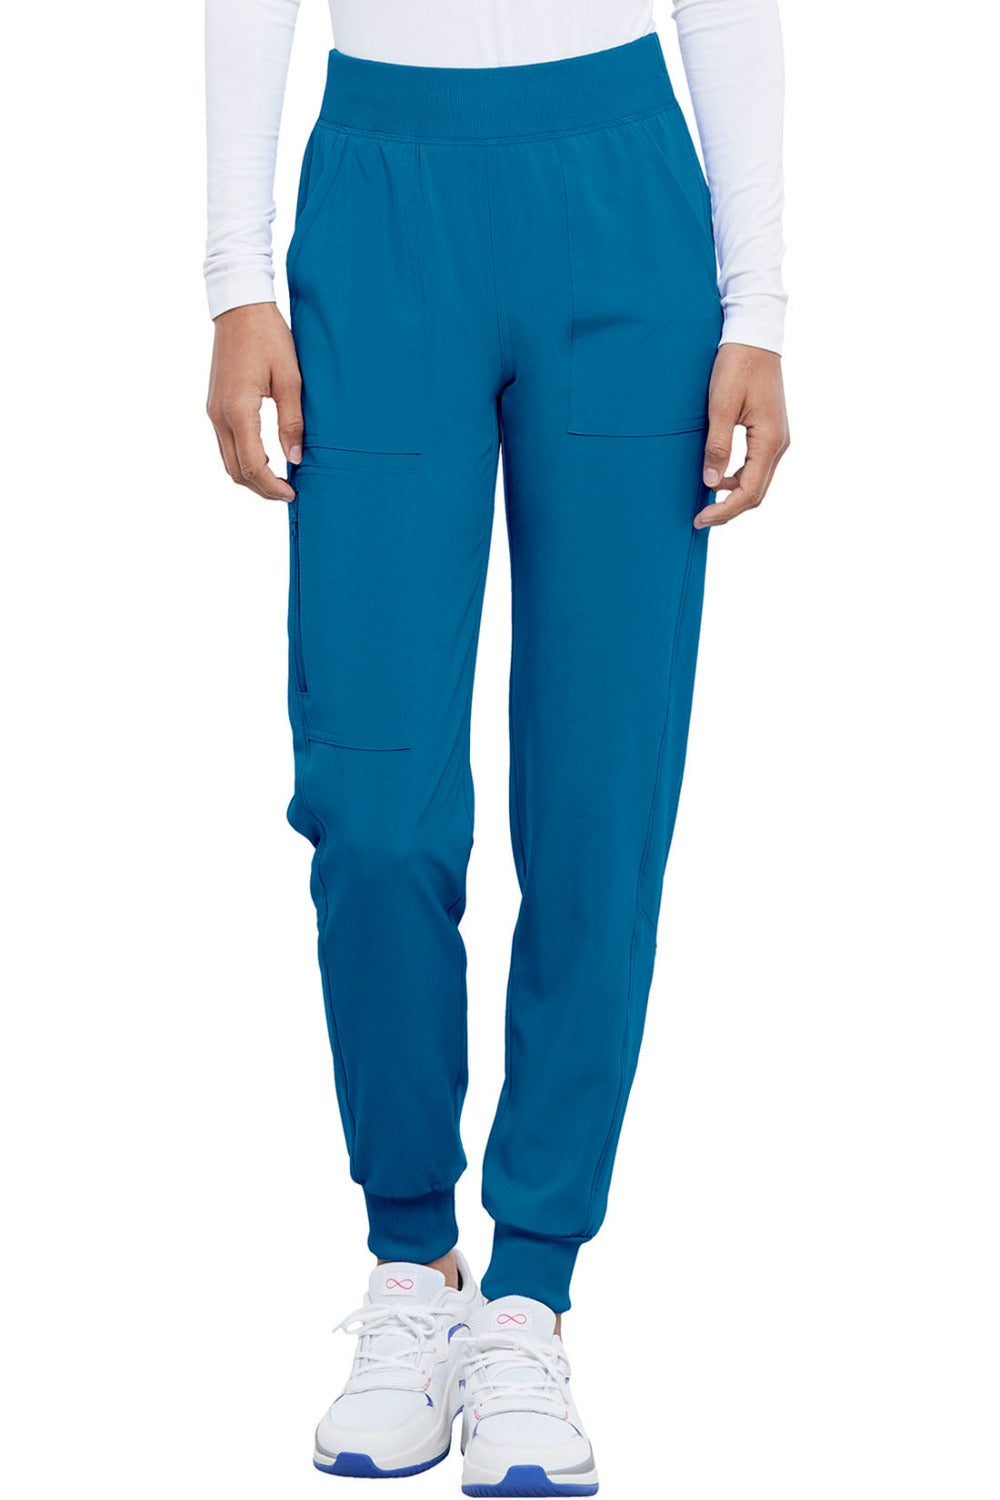 Cherokee Allura Scrub Pant Pull On Jogger in Caribbean at Parker's Clothing and Shoes.